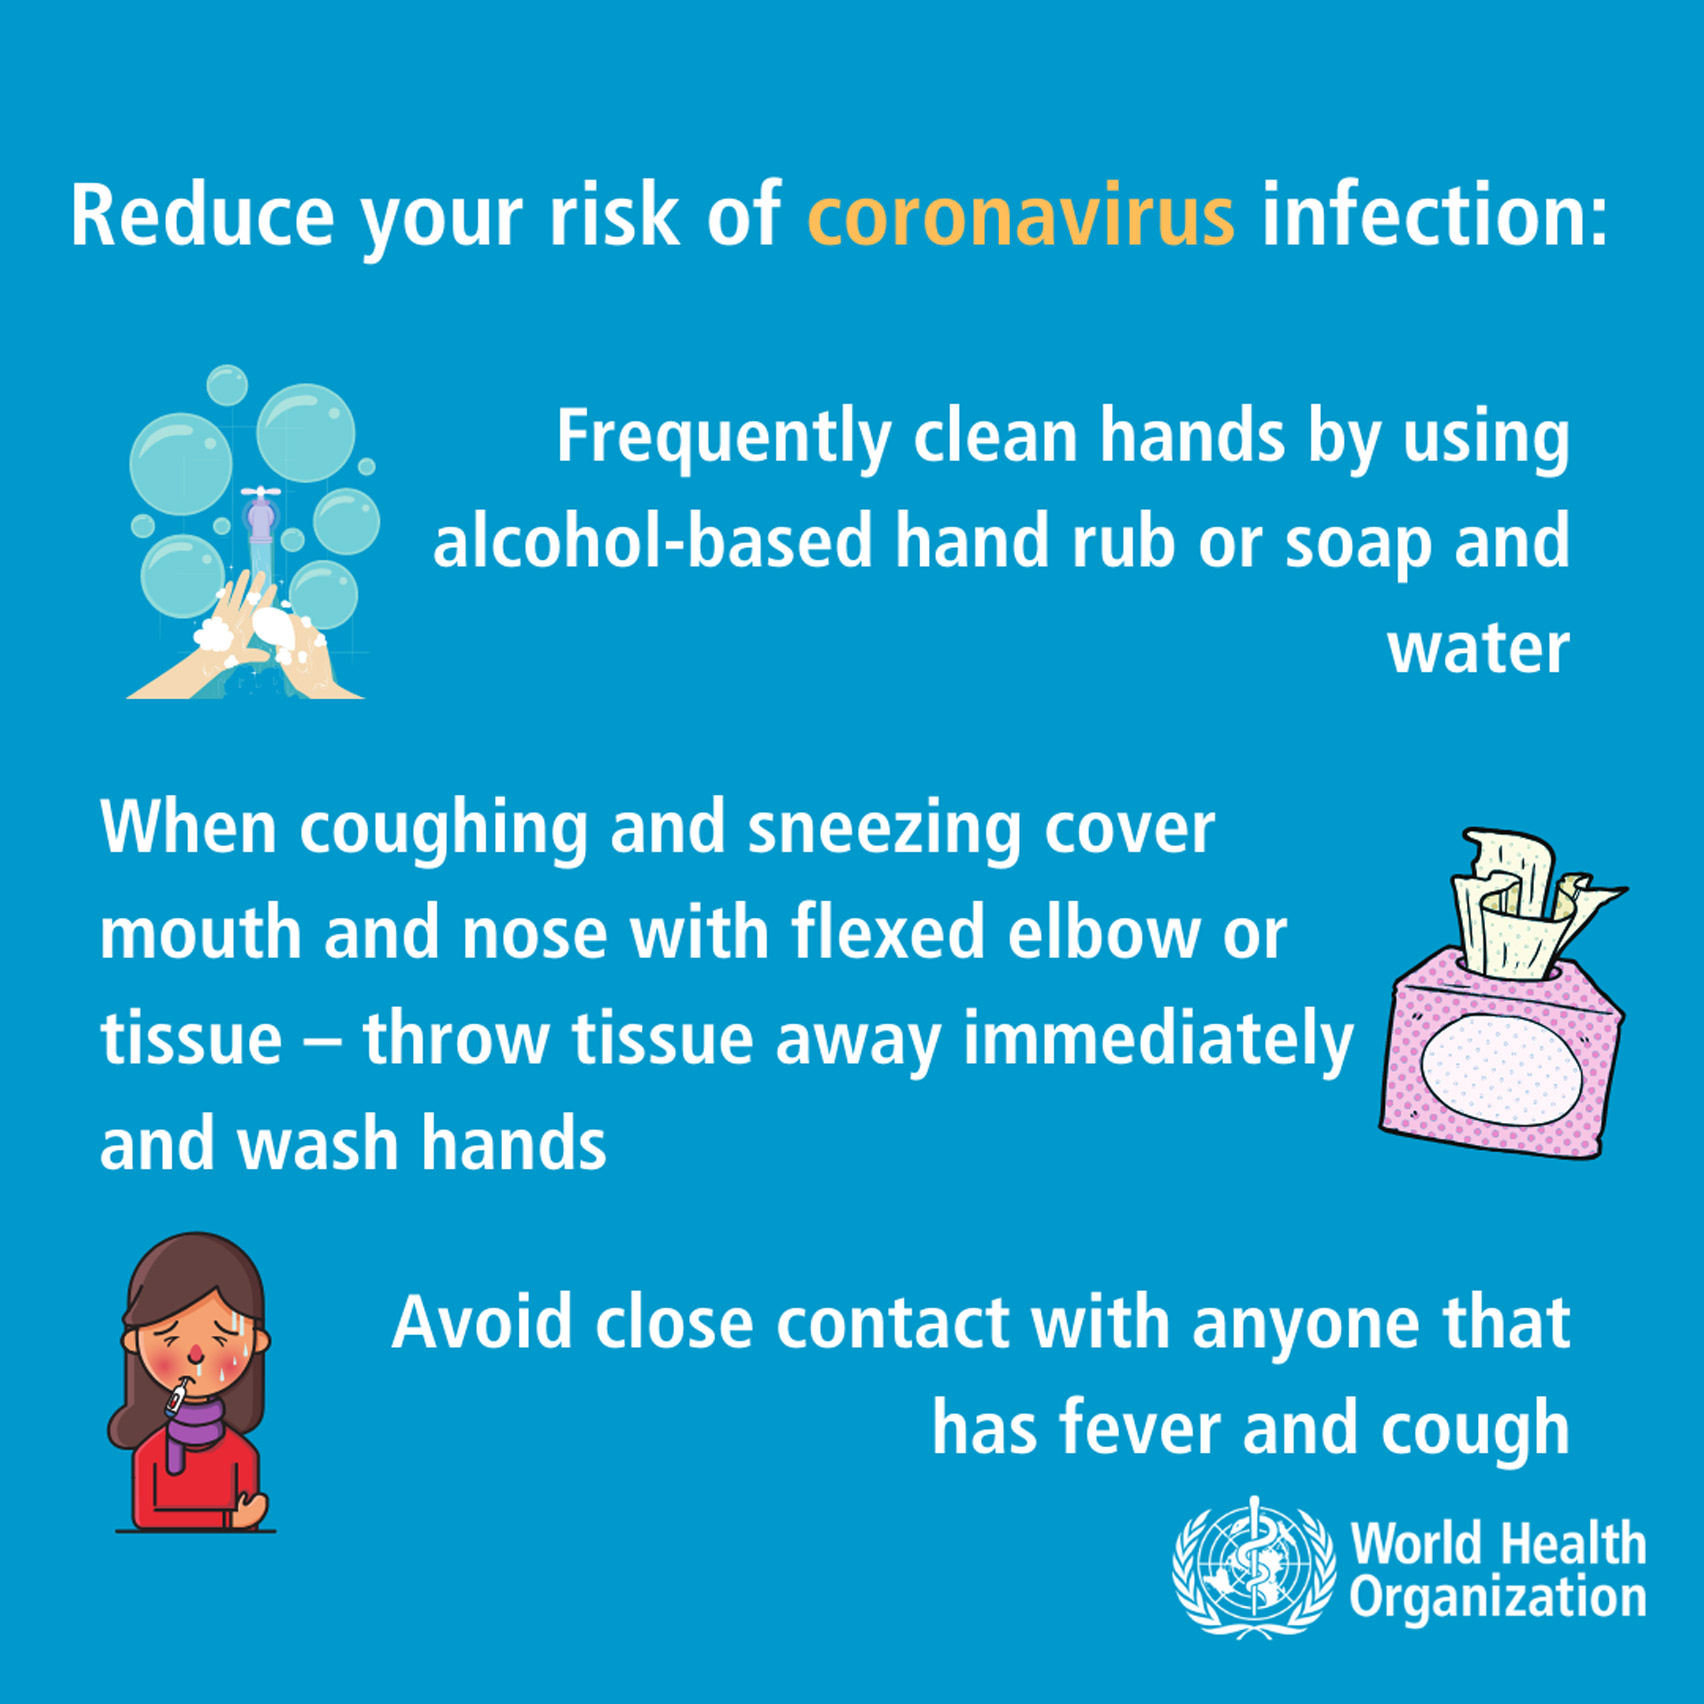 United Nations calls on creatives to share messages about coronavirus